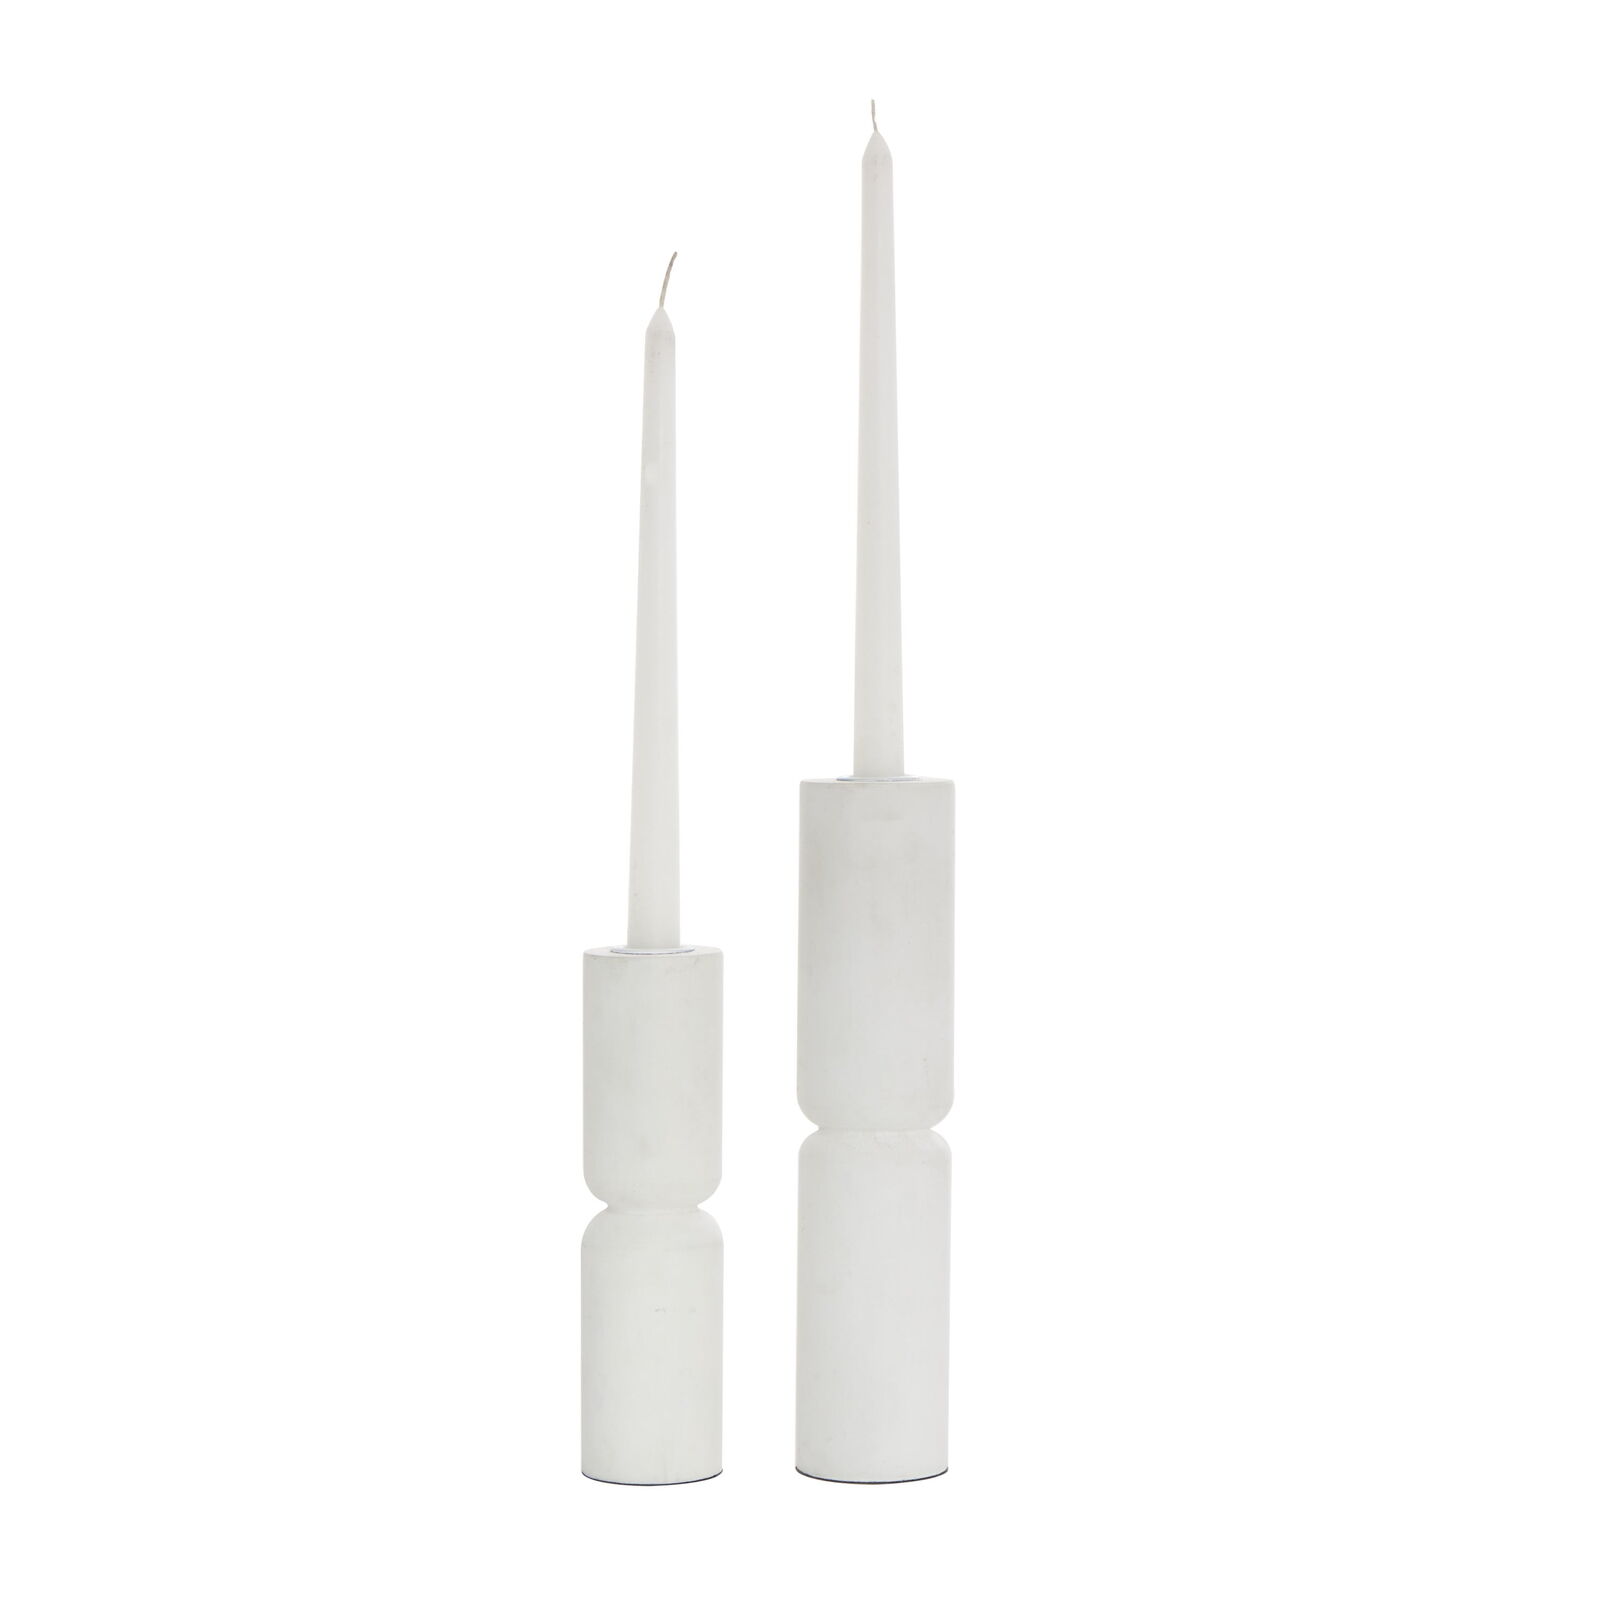 DecMode 2 Candle White Wood Minimalistic Tapered Candle Holder, Set of 2